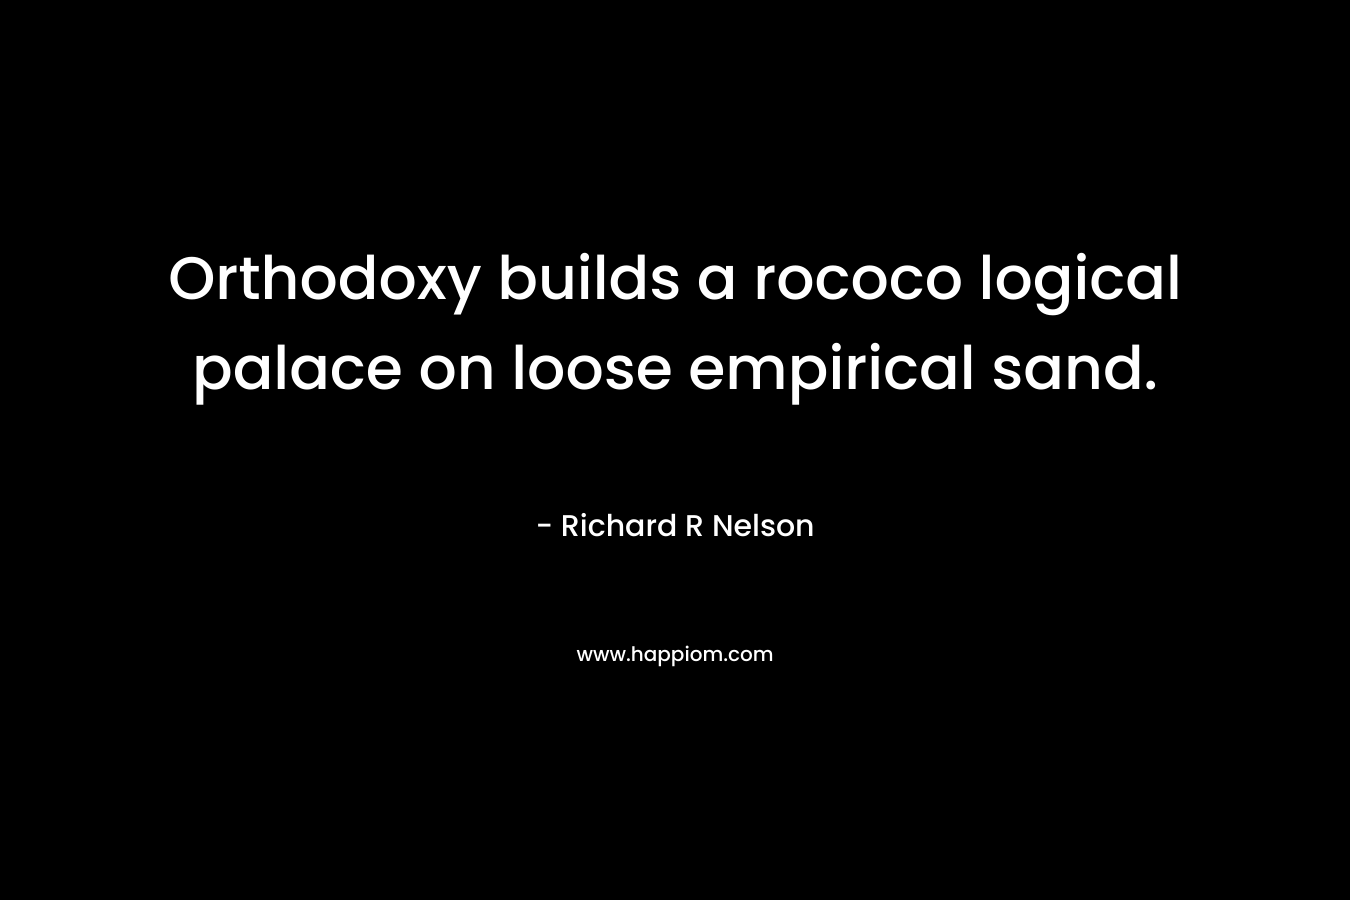 Orthodoxy builds a rococo logical palace on loose empirical sand. – Richard R Nelson